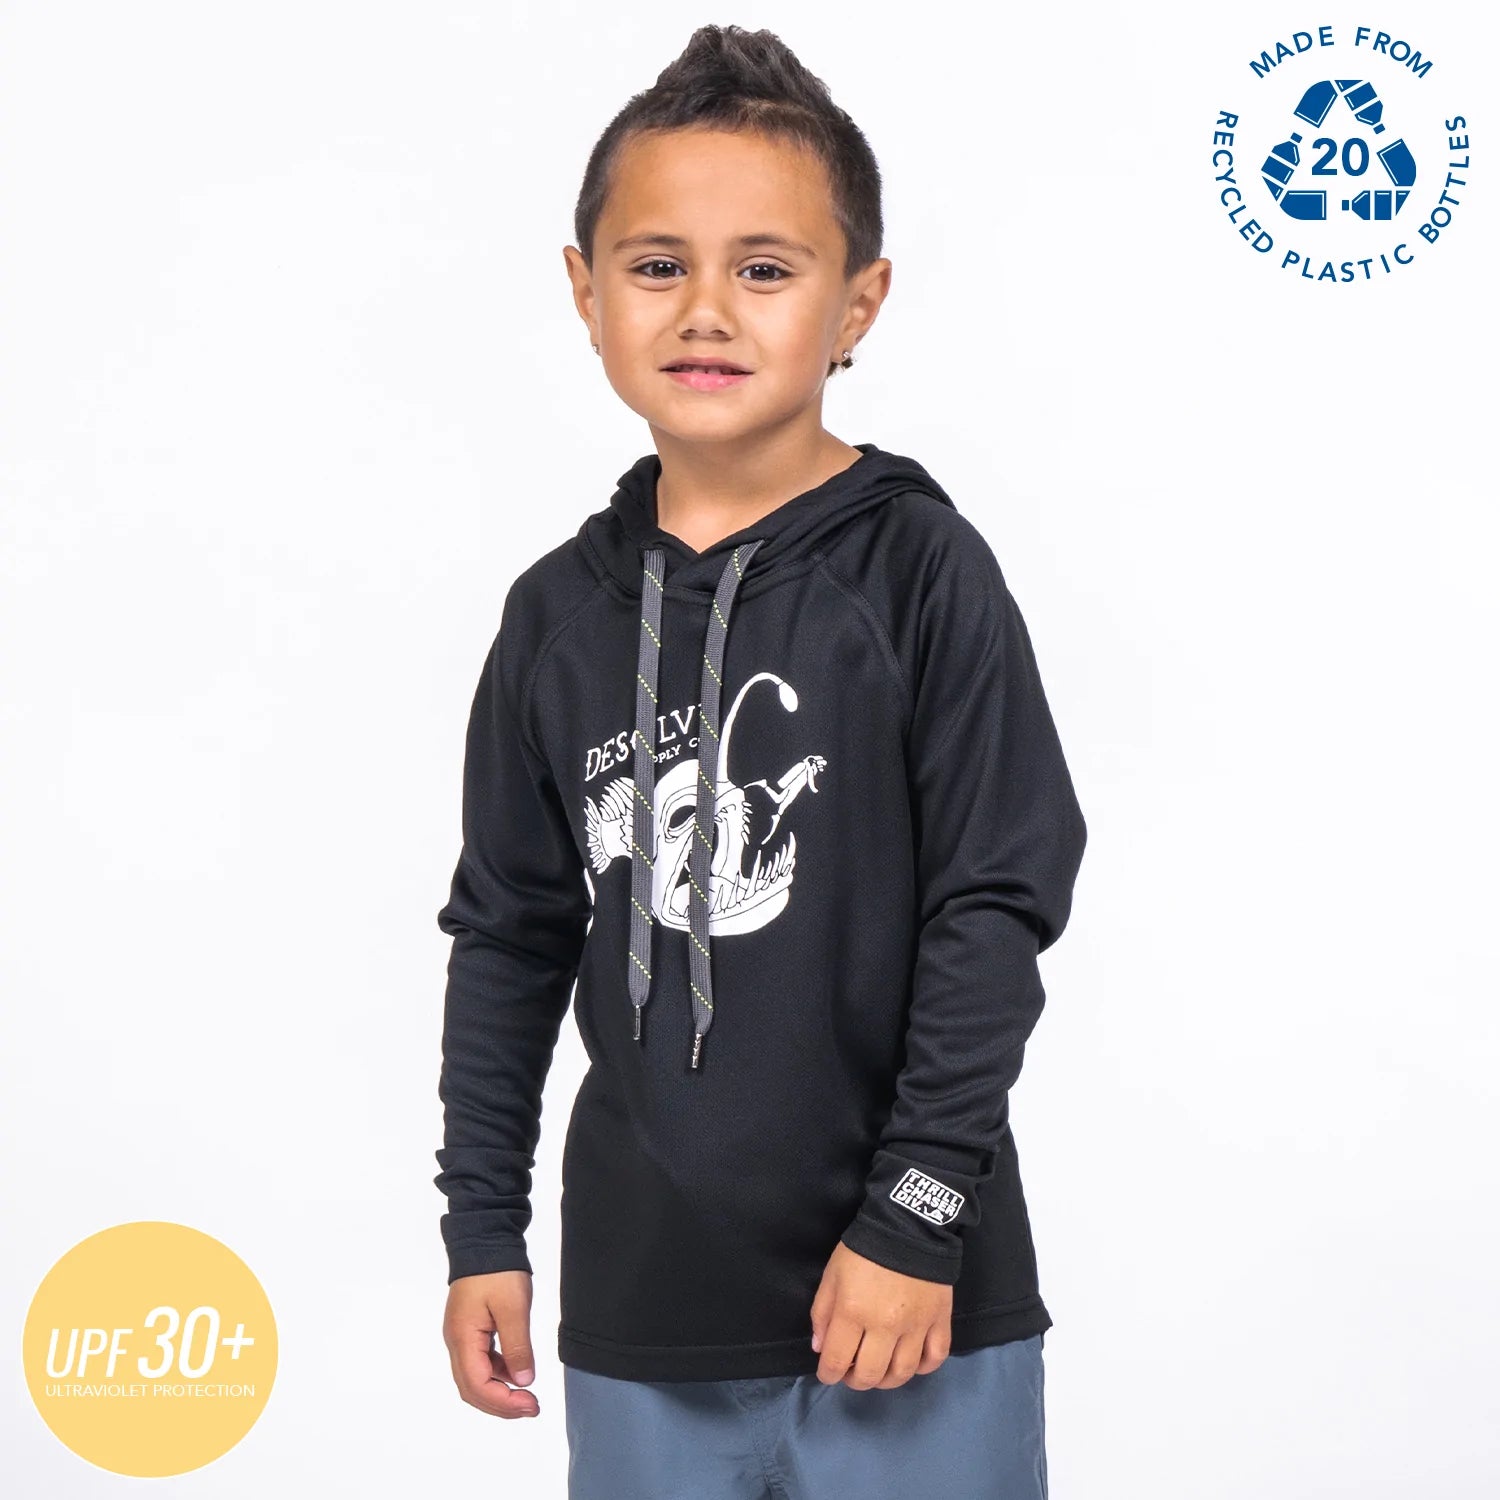 Hunters Element Kids Breaker Hoody - 4 / CHARCOAL - Mansfield Hunting & Fishing - Products to prepare for Corona Virus